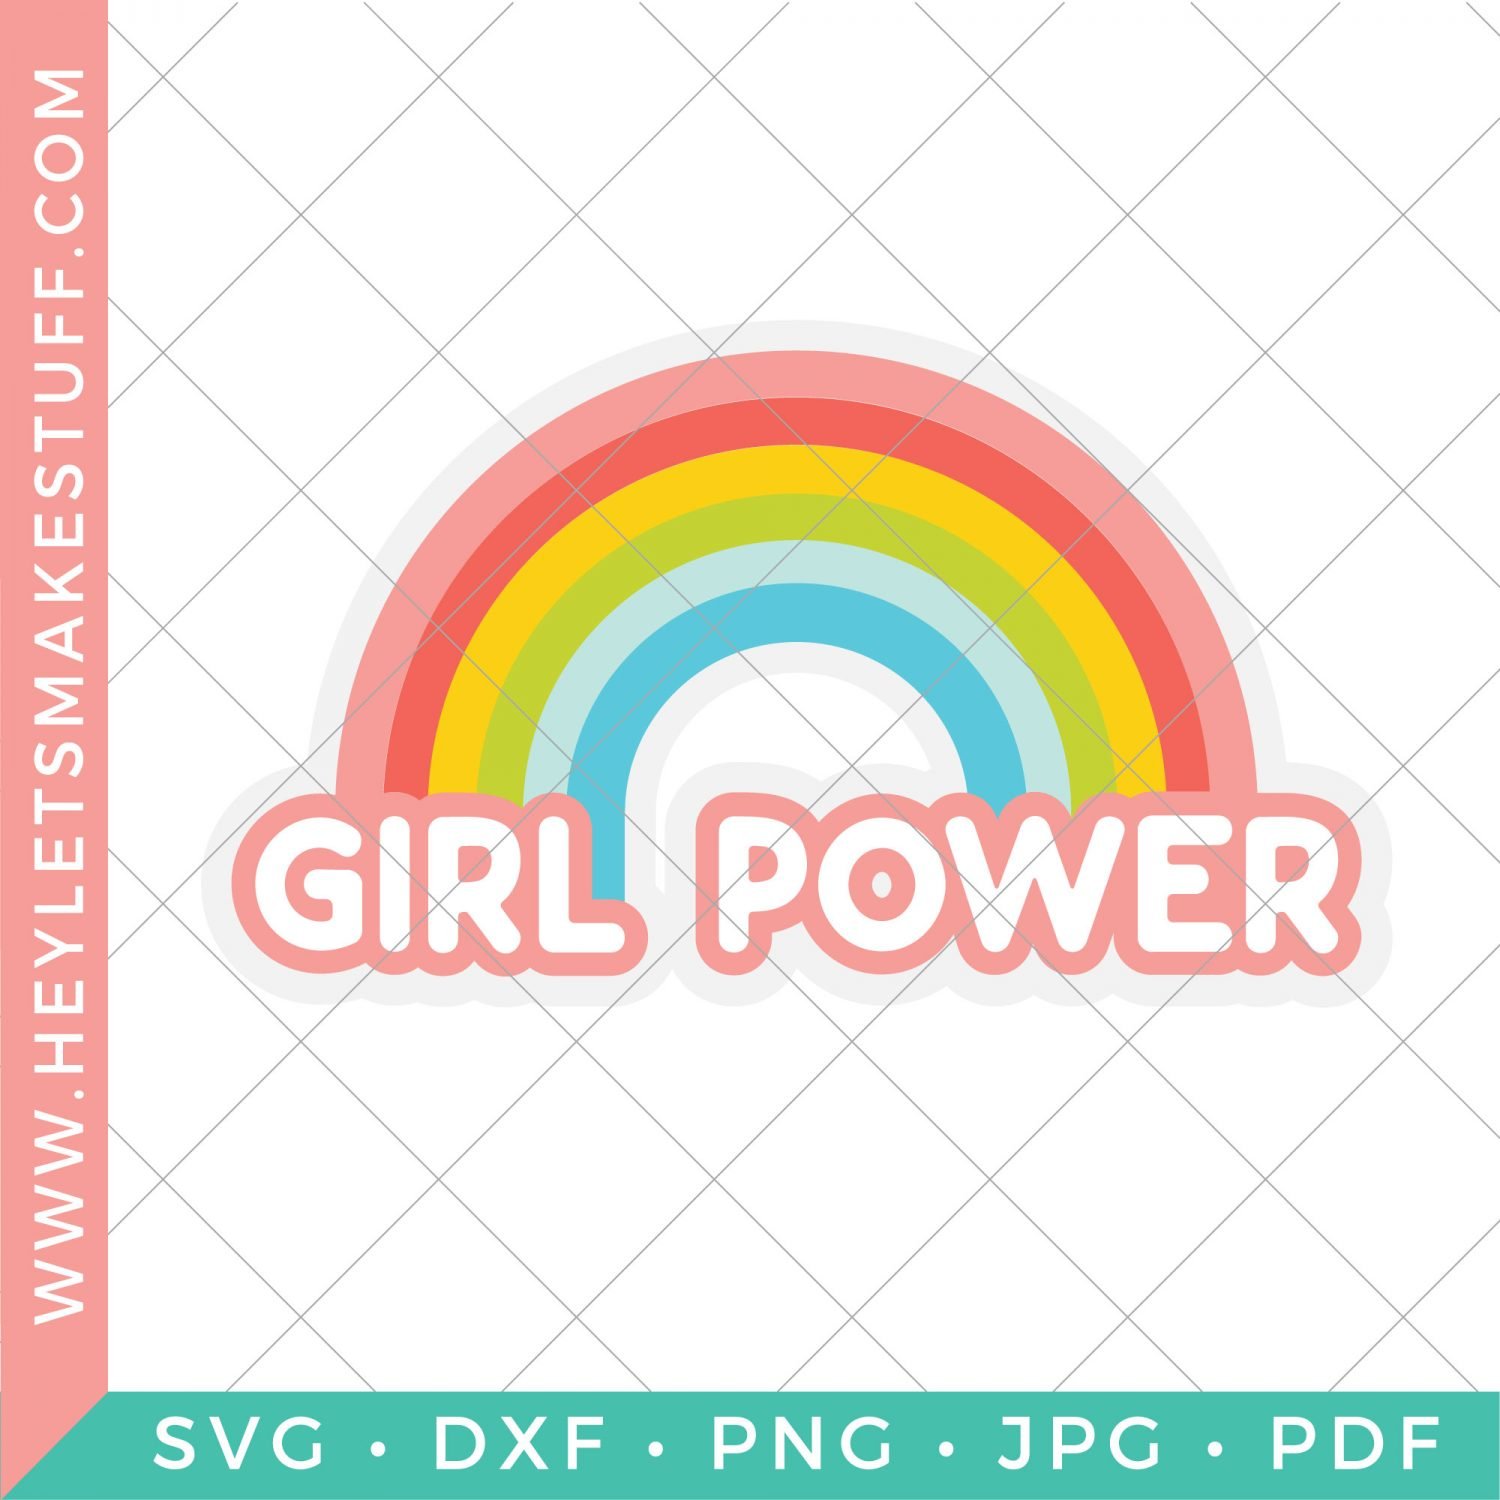 Girl Power security image for SVG